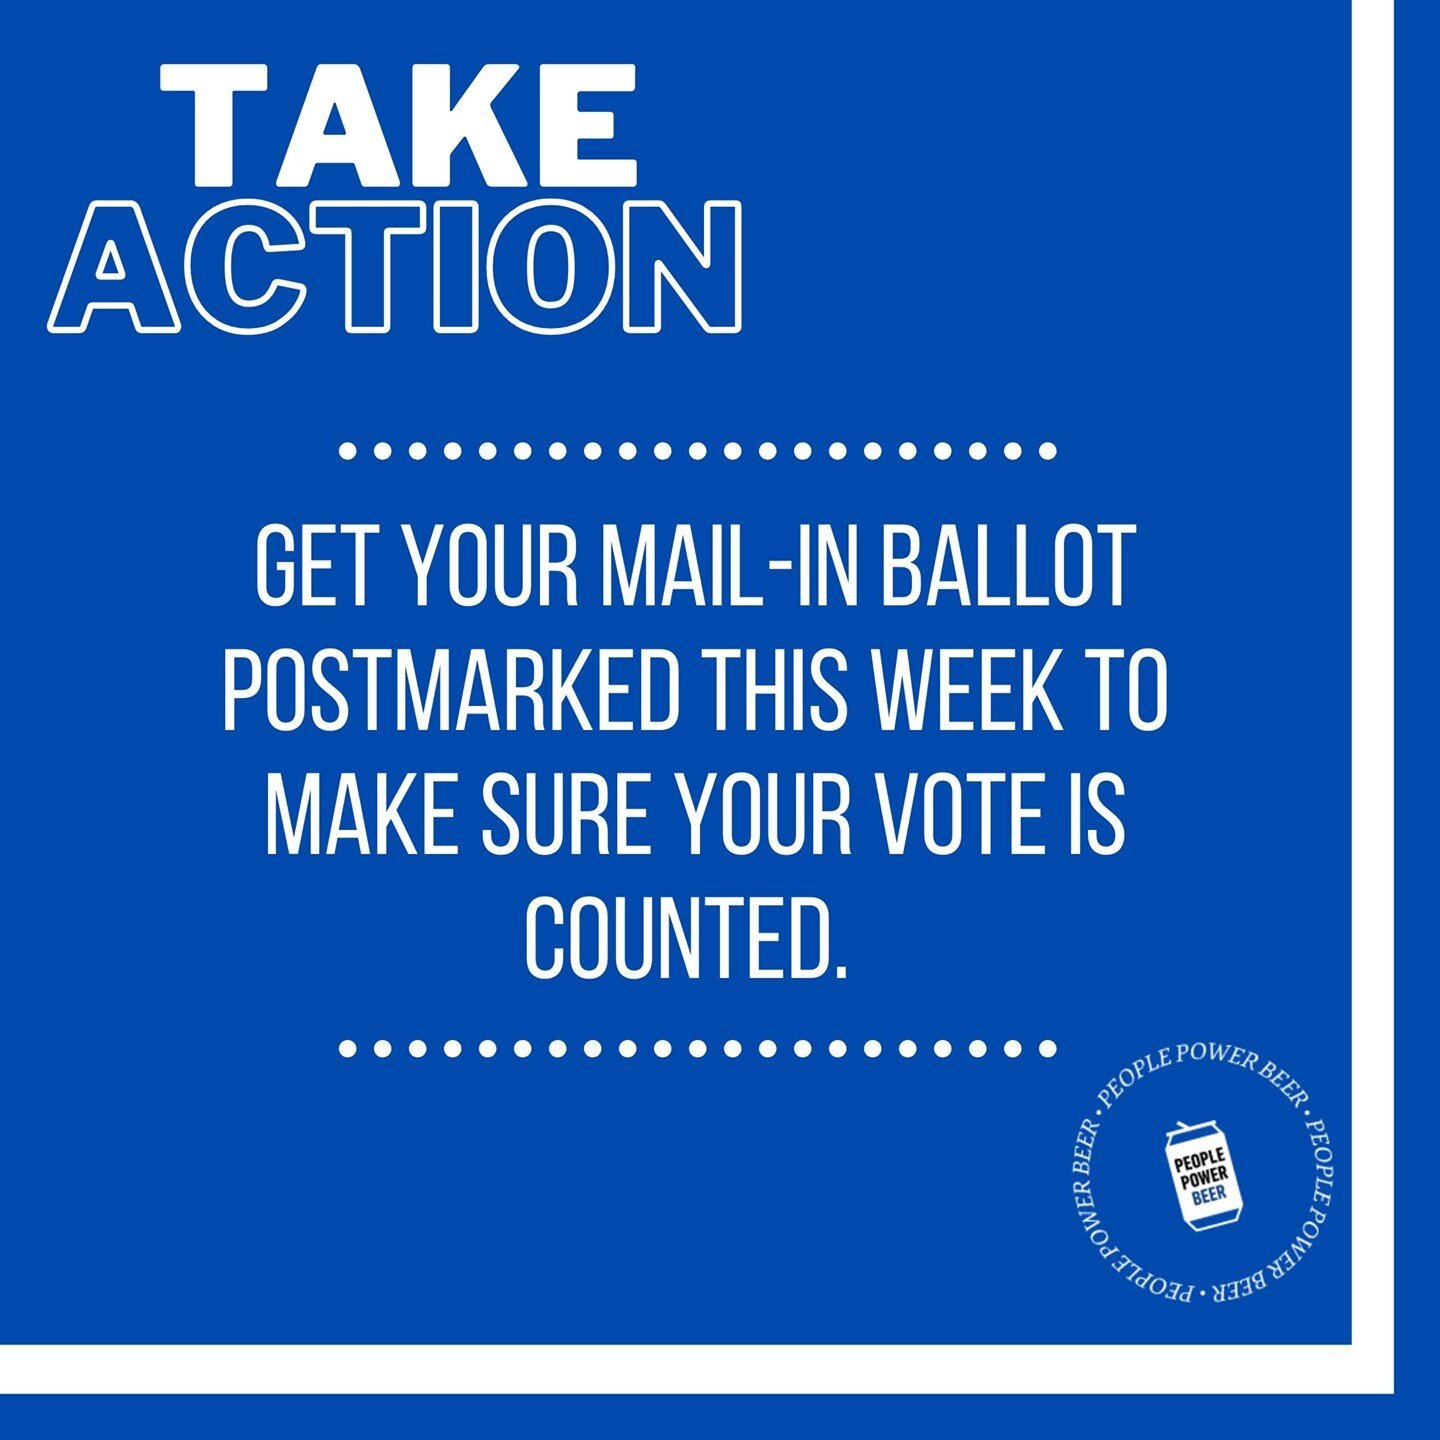 If not this week then next, but the sooner the better. Double check you have the right ballot, your personal information is correct, and you've signed any parts that need to be signed. Take the time to make sure there are no additional errors and, if